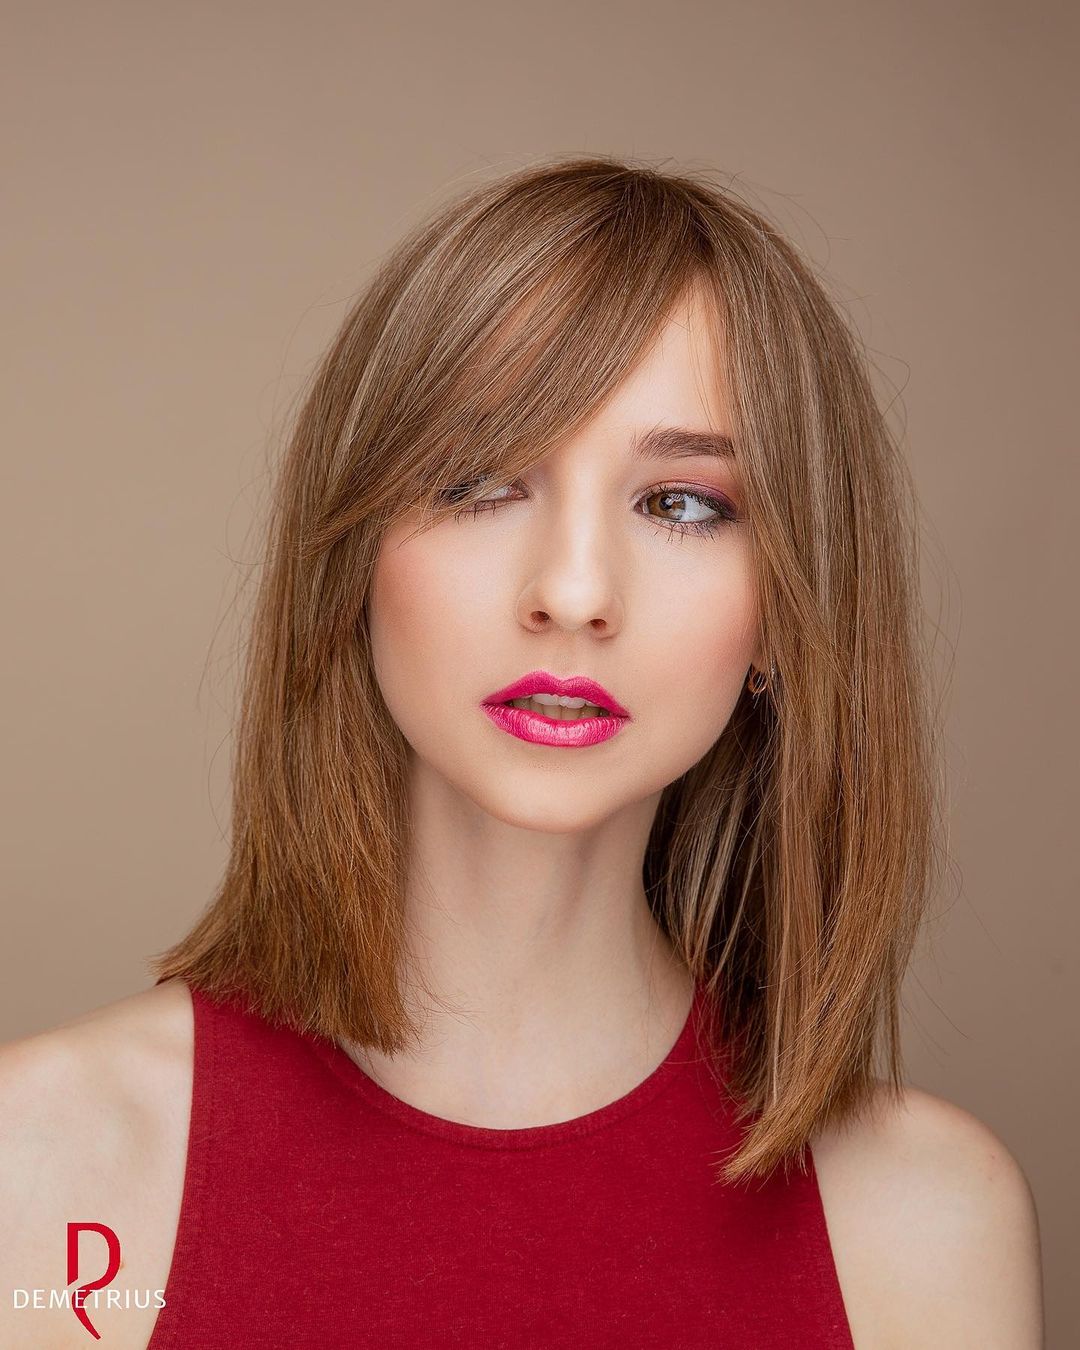 22 trendiest long bobs with bangs women are asking for right now